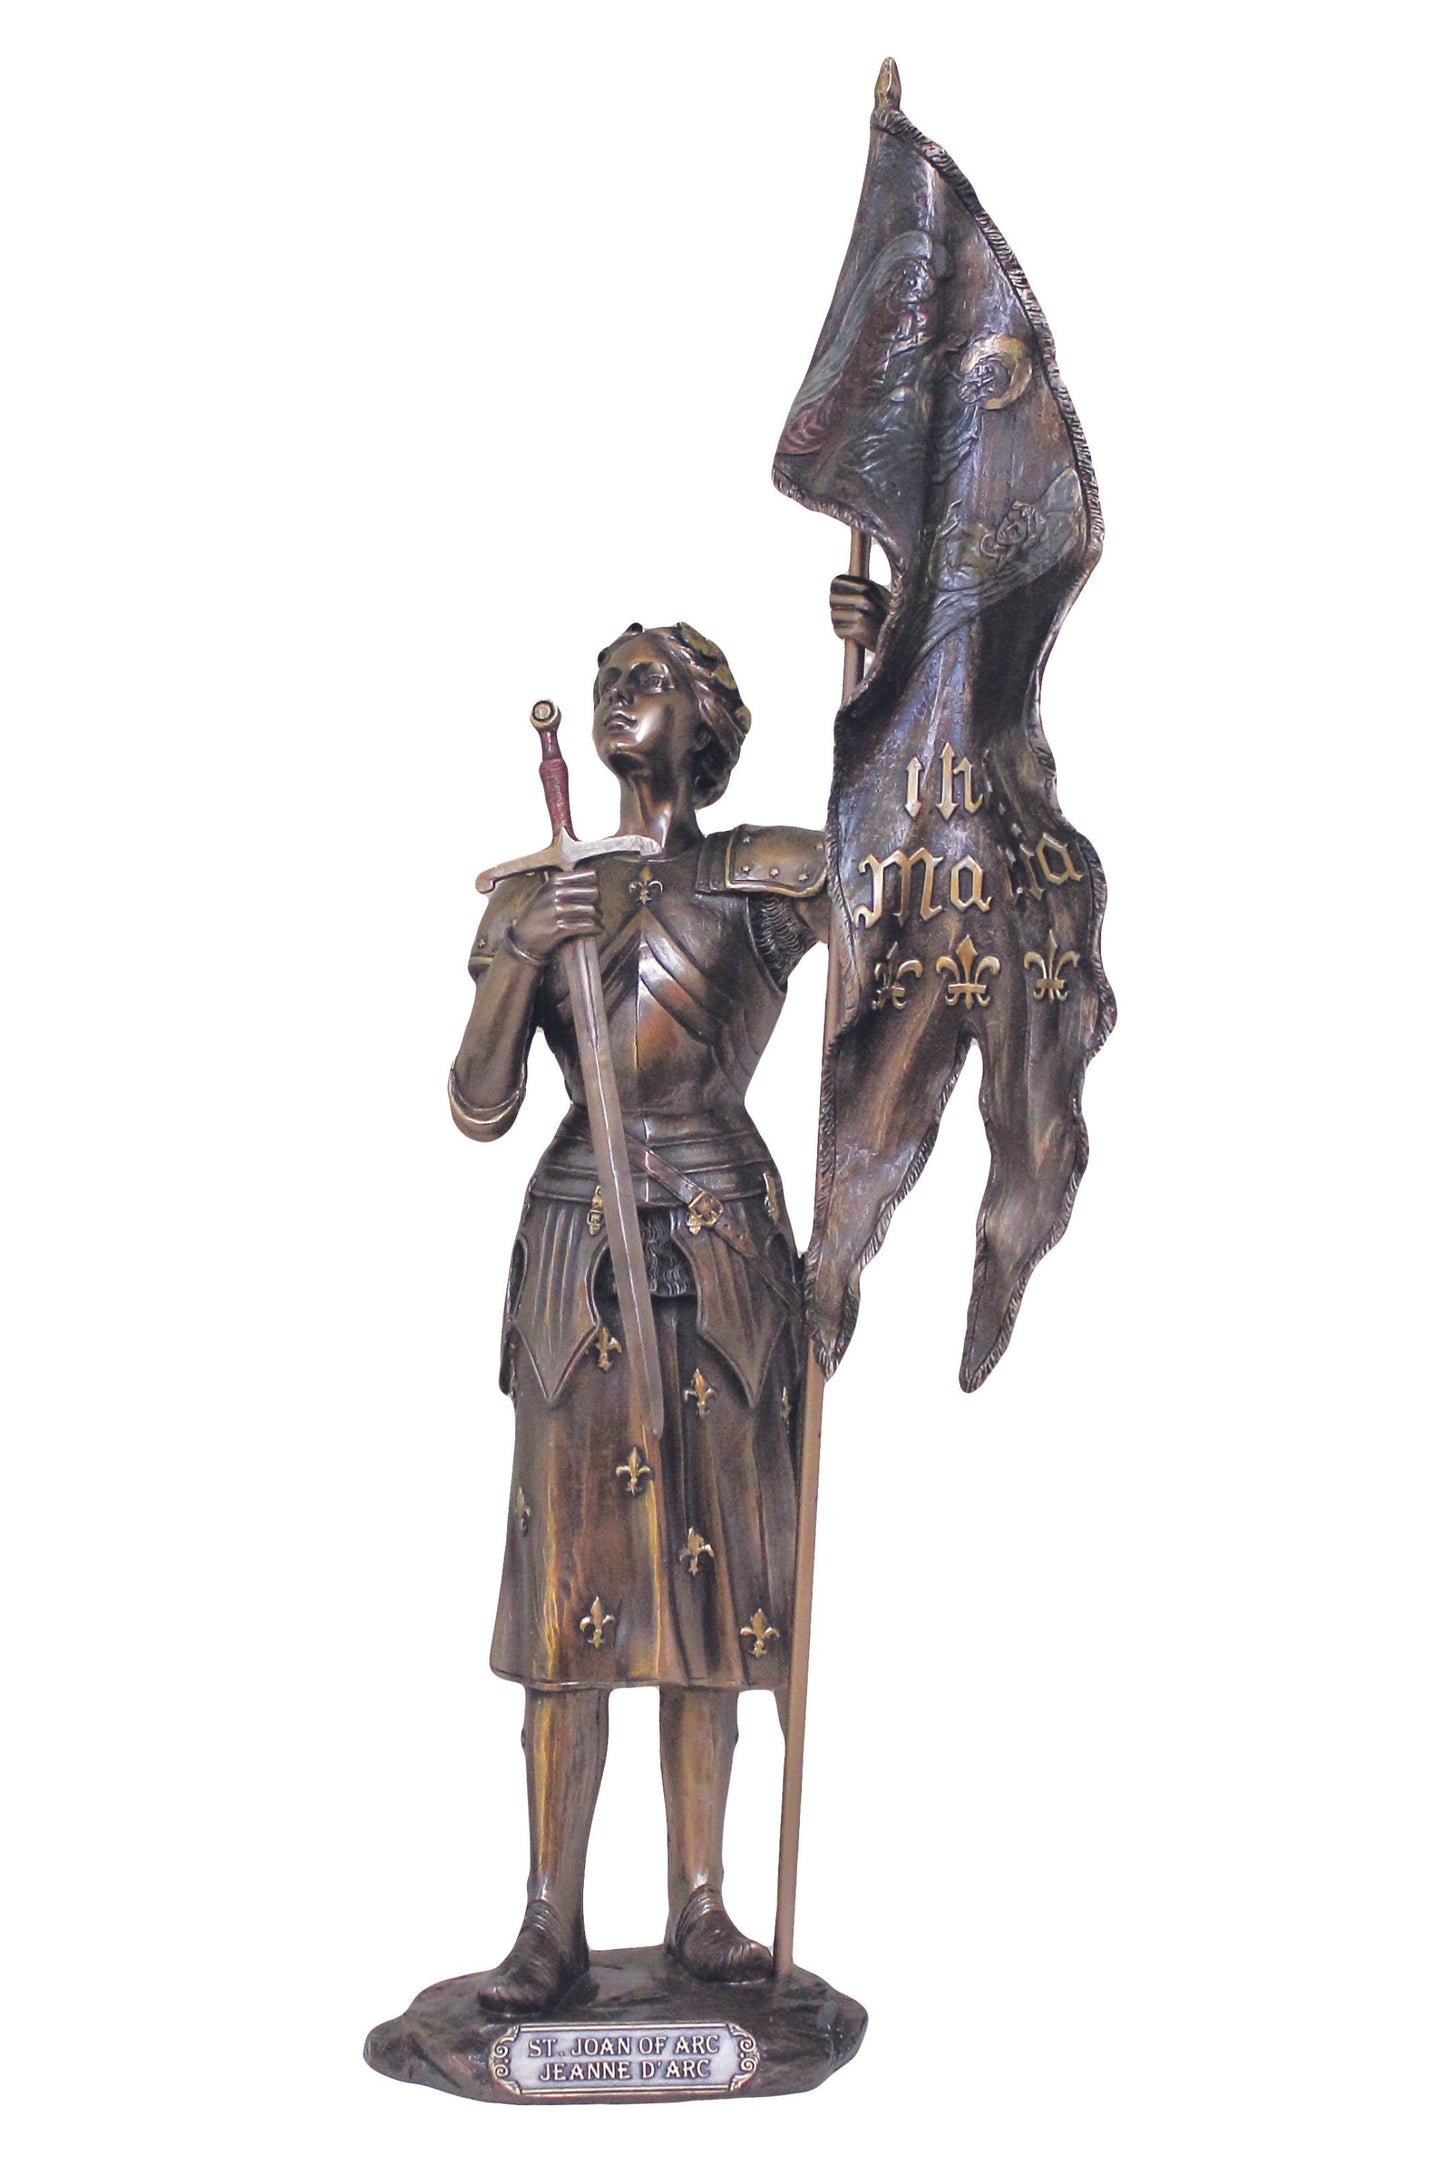 SR-76022 St. Joan of Arc in Cold Cast Bronze 11"